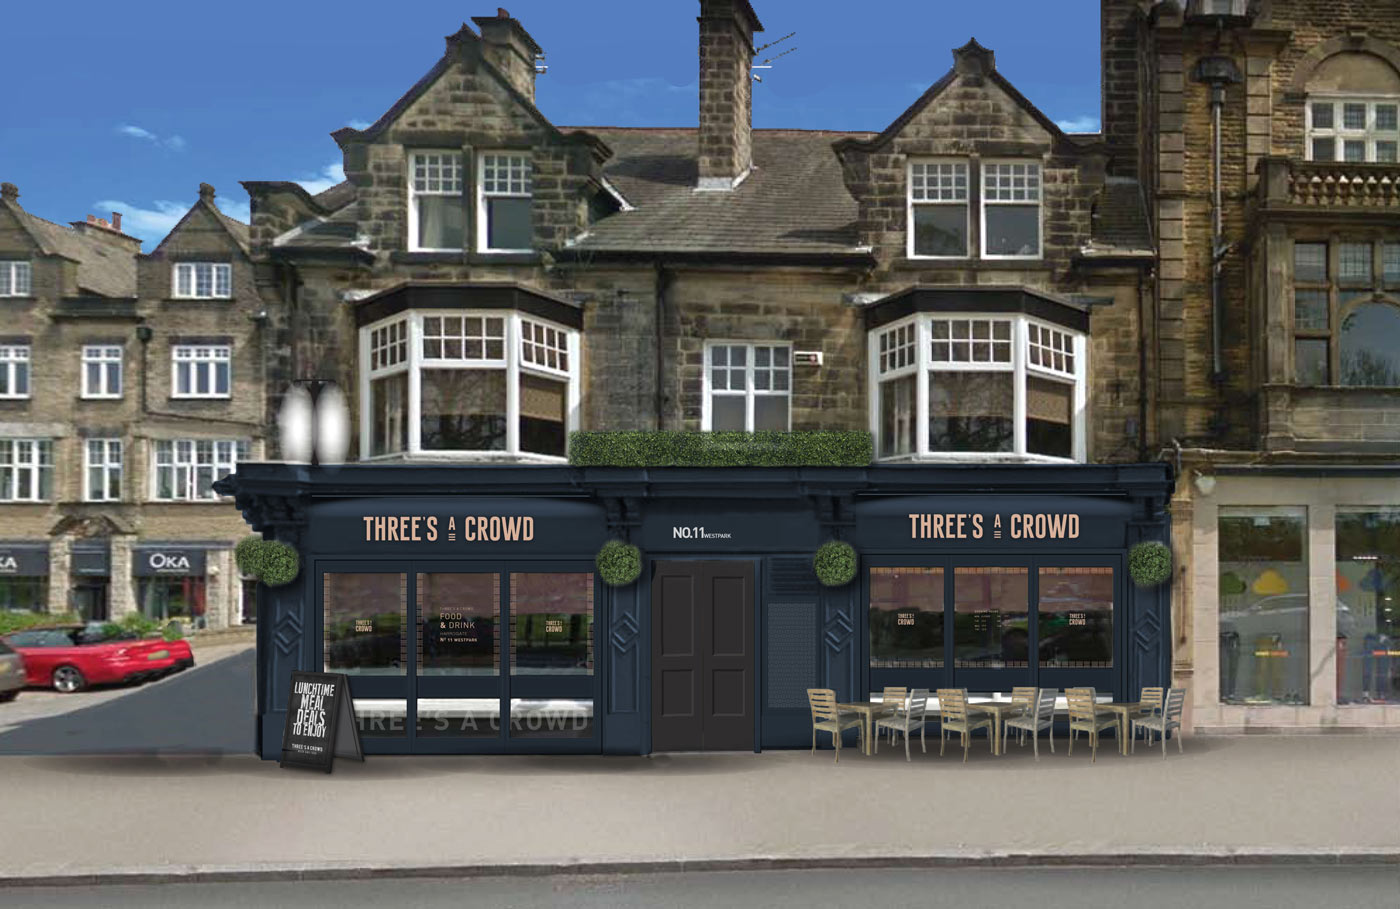 Harrogate artist's impression of what it will look like post the revamp. The pub is being renamed Three's A Crowd.